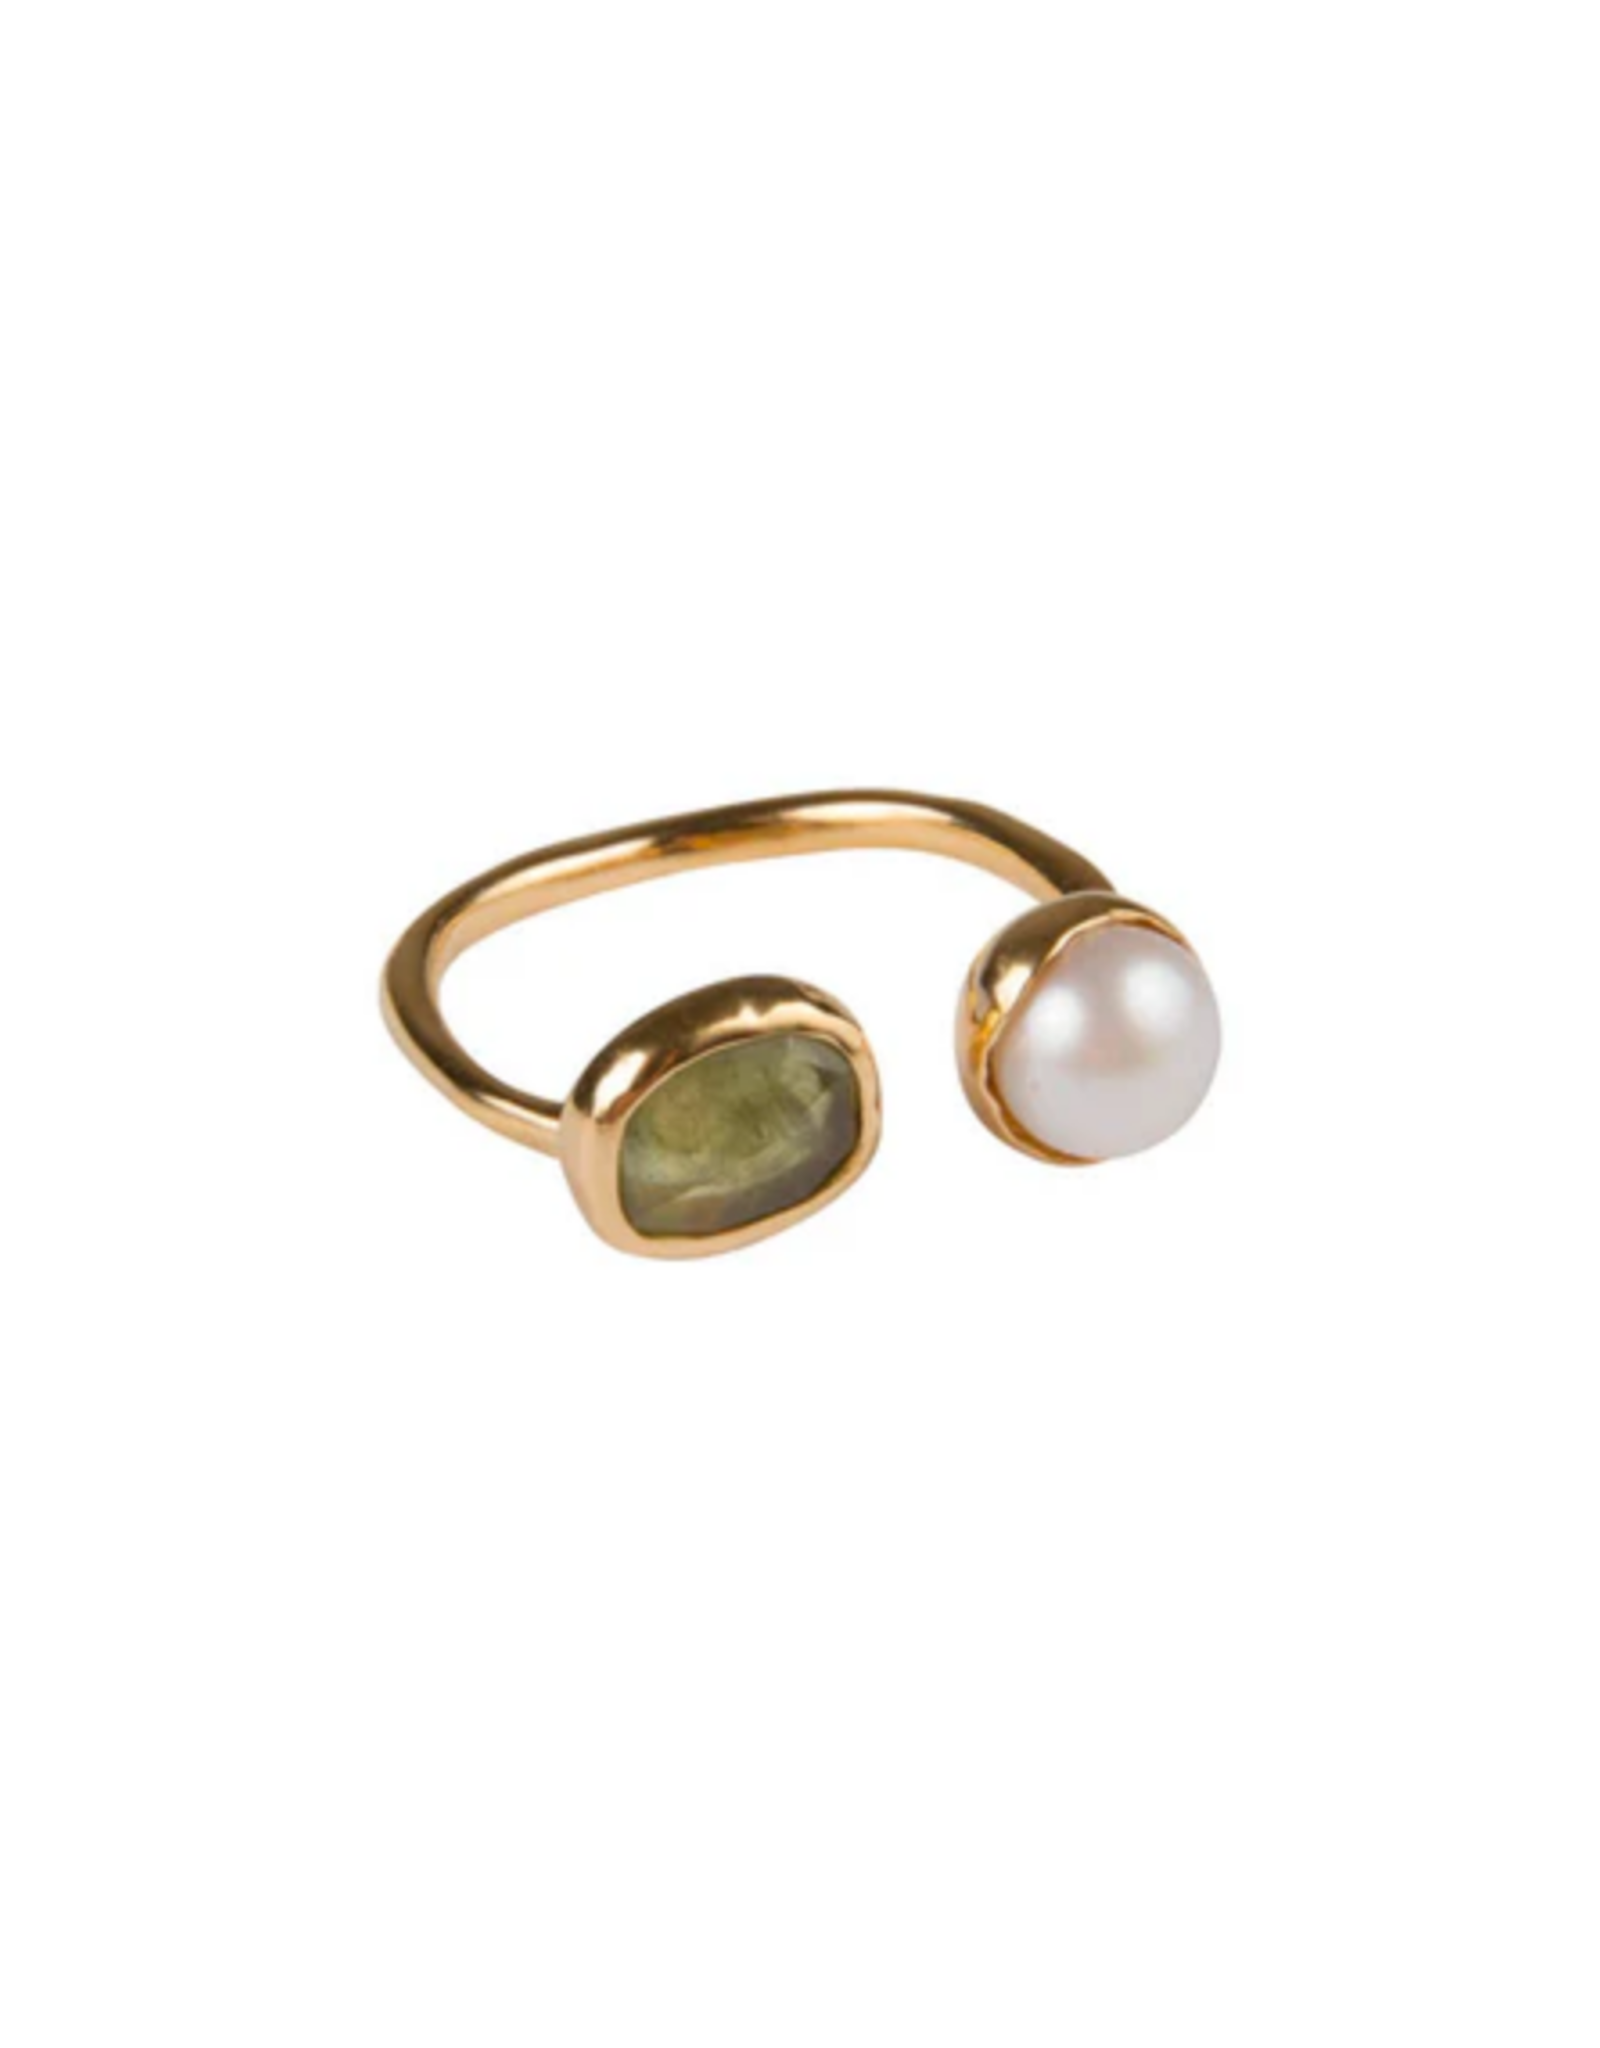 FAIRLEY PEARL AND GREEN SAPPHIRE RING SIZE 7